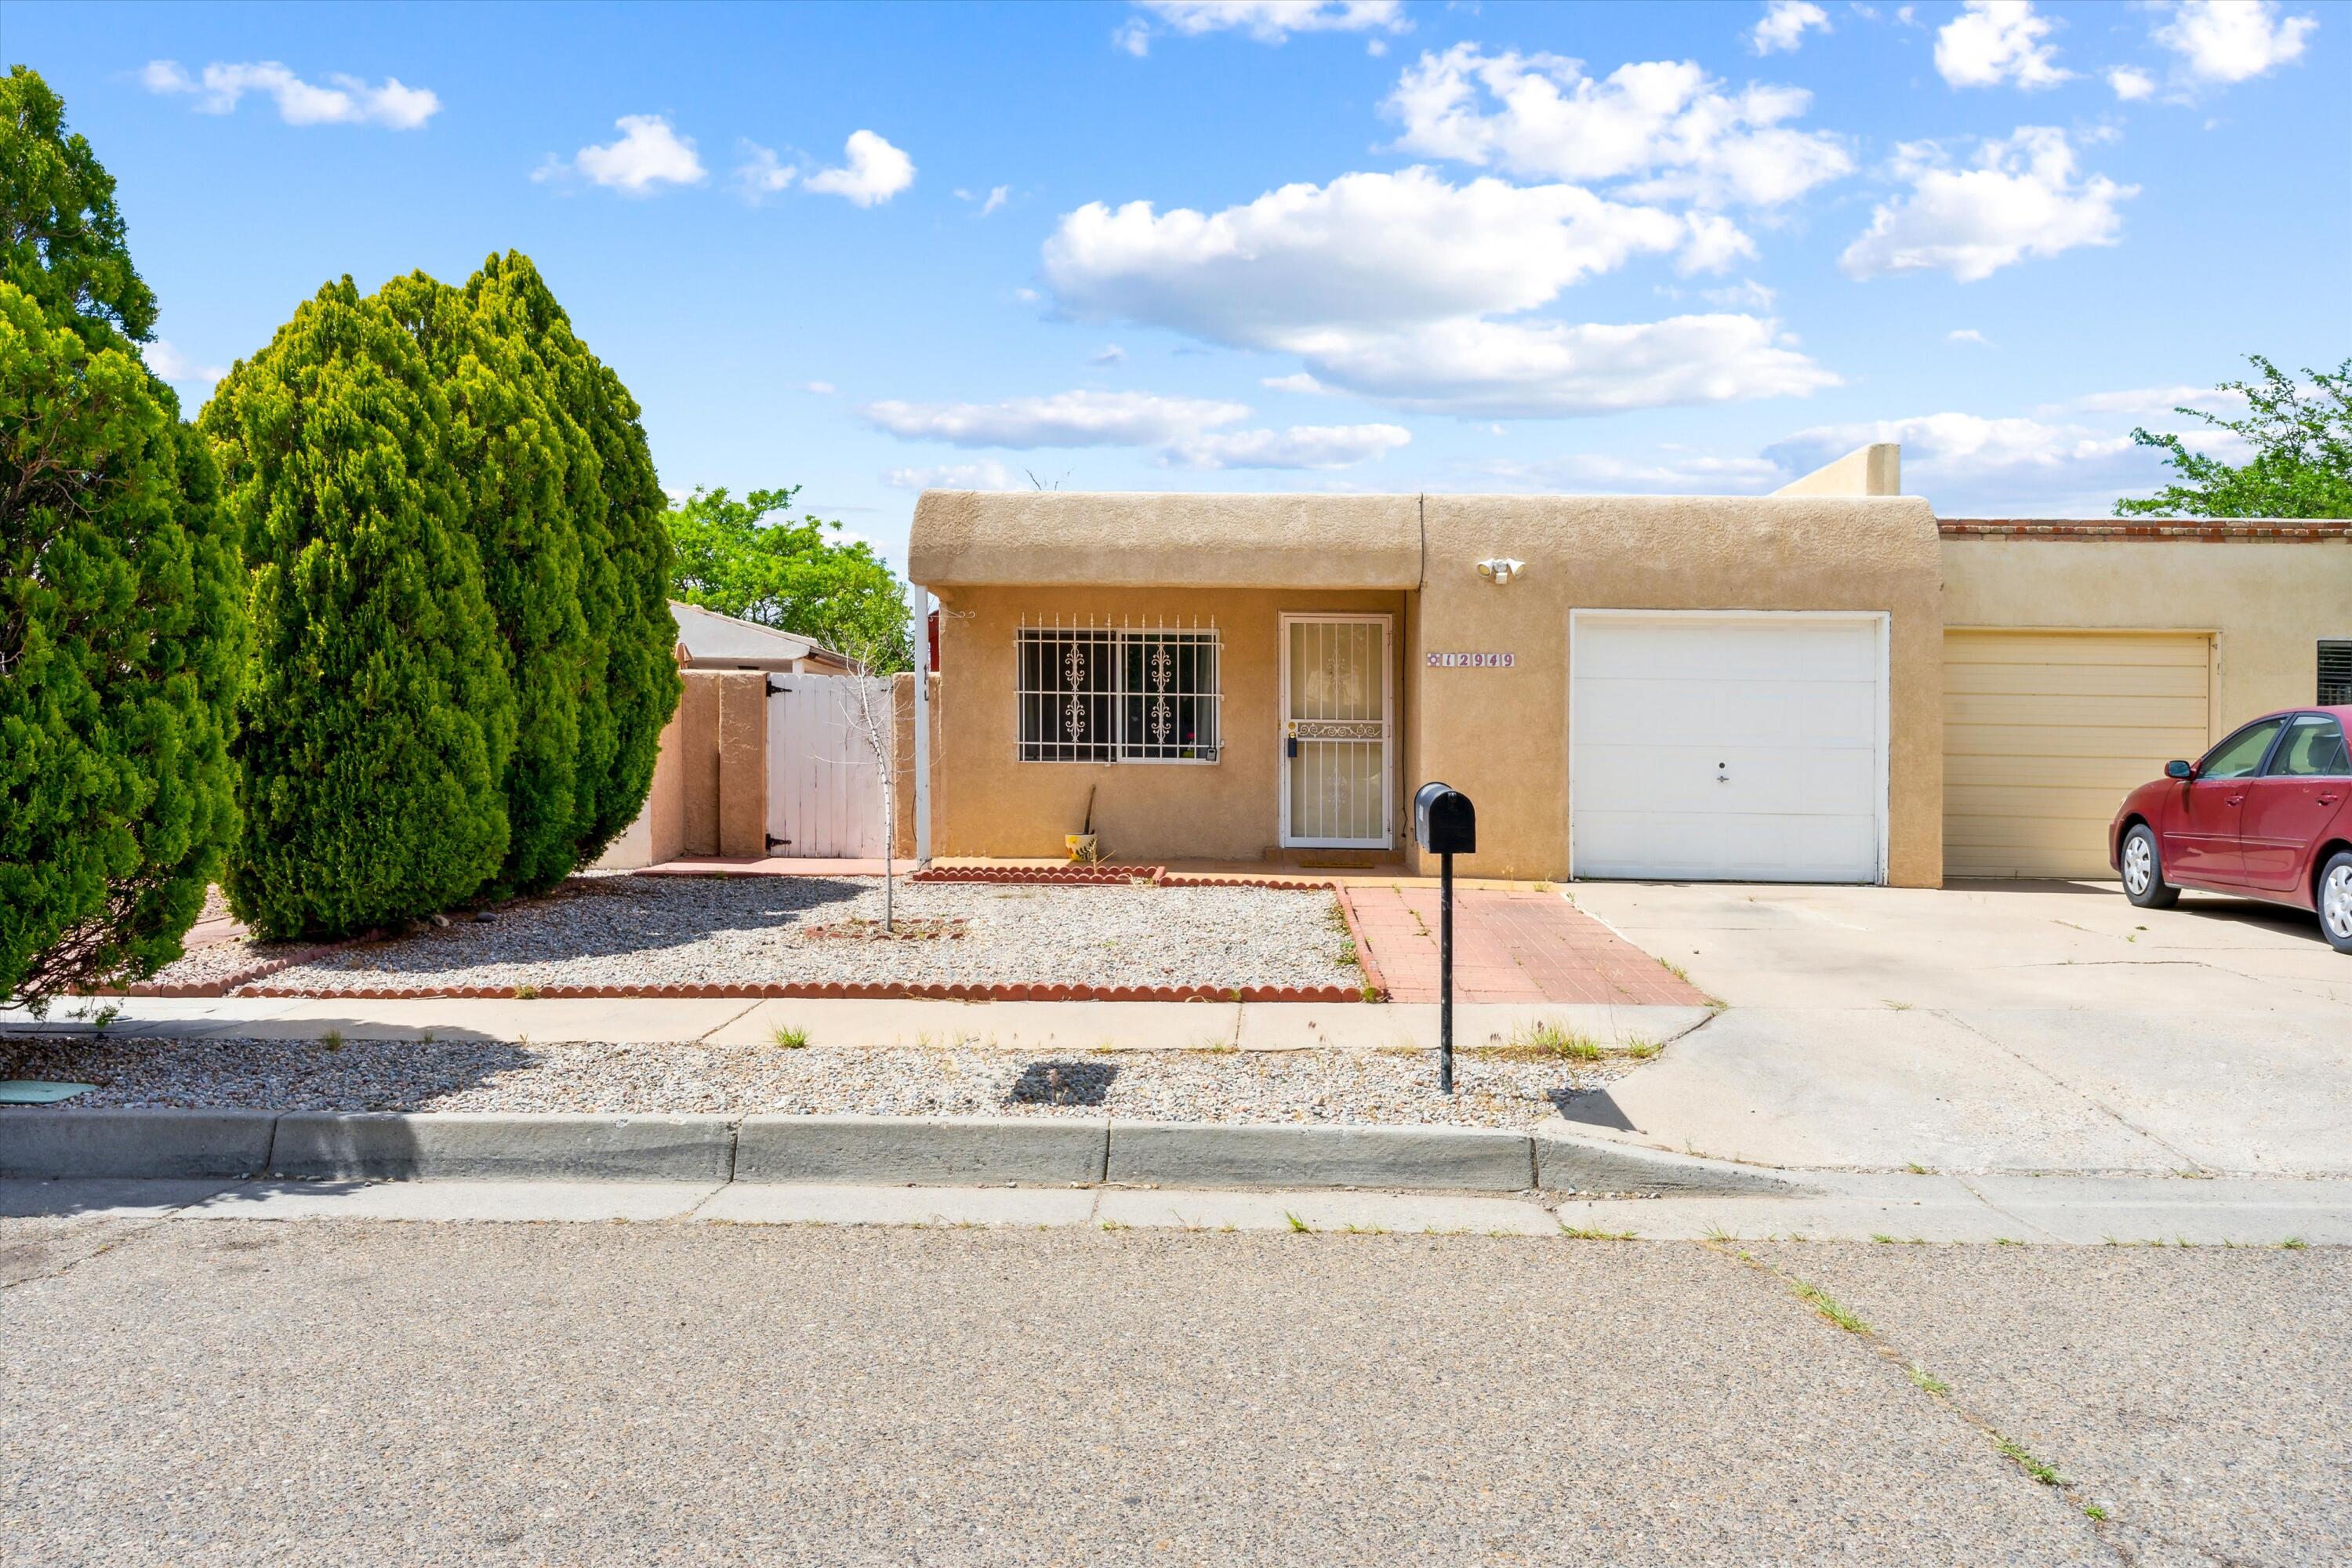 Don't miss this beautiful 3 bedroom, 2 bathroom home in SE ABQ! The home features a spacious living area, functional kitchen and a backyard with a patio and plenty of space for entertaining. Bonus room that would make a great spare bedroom or home office. Schedule your tour today!